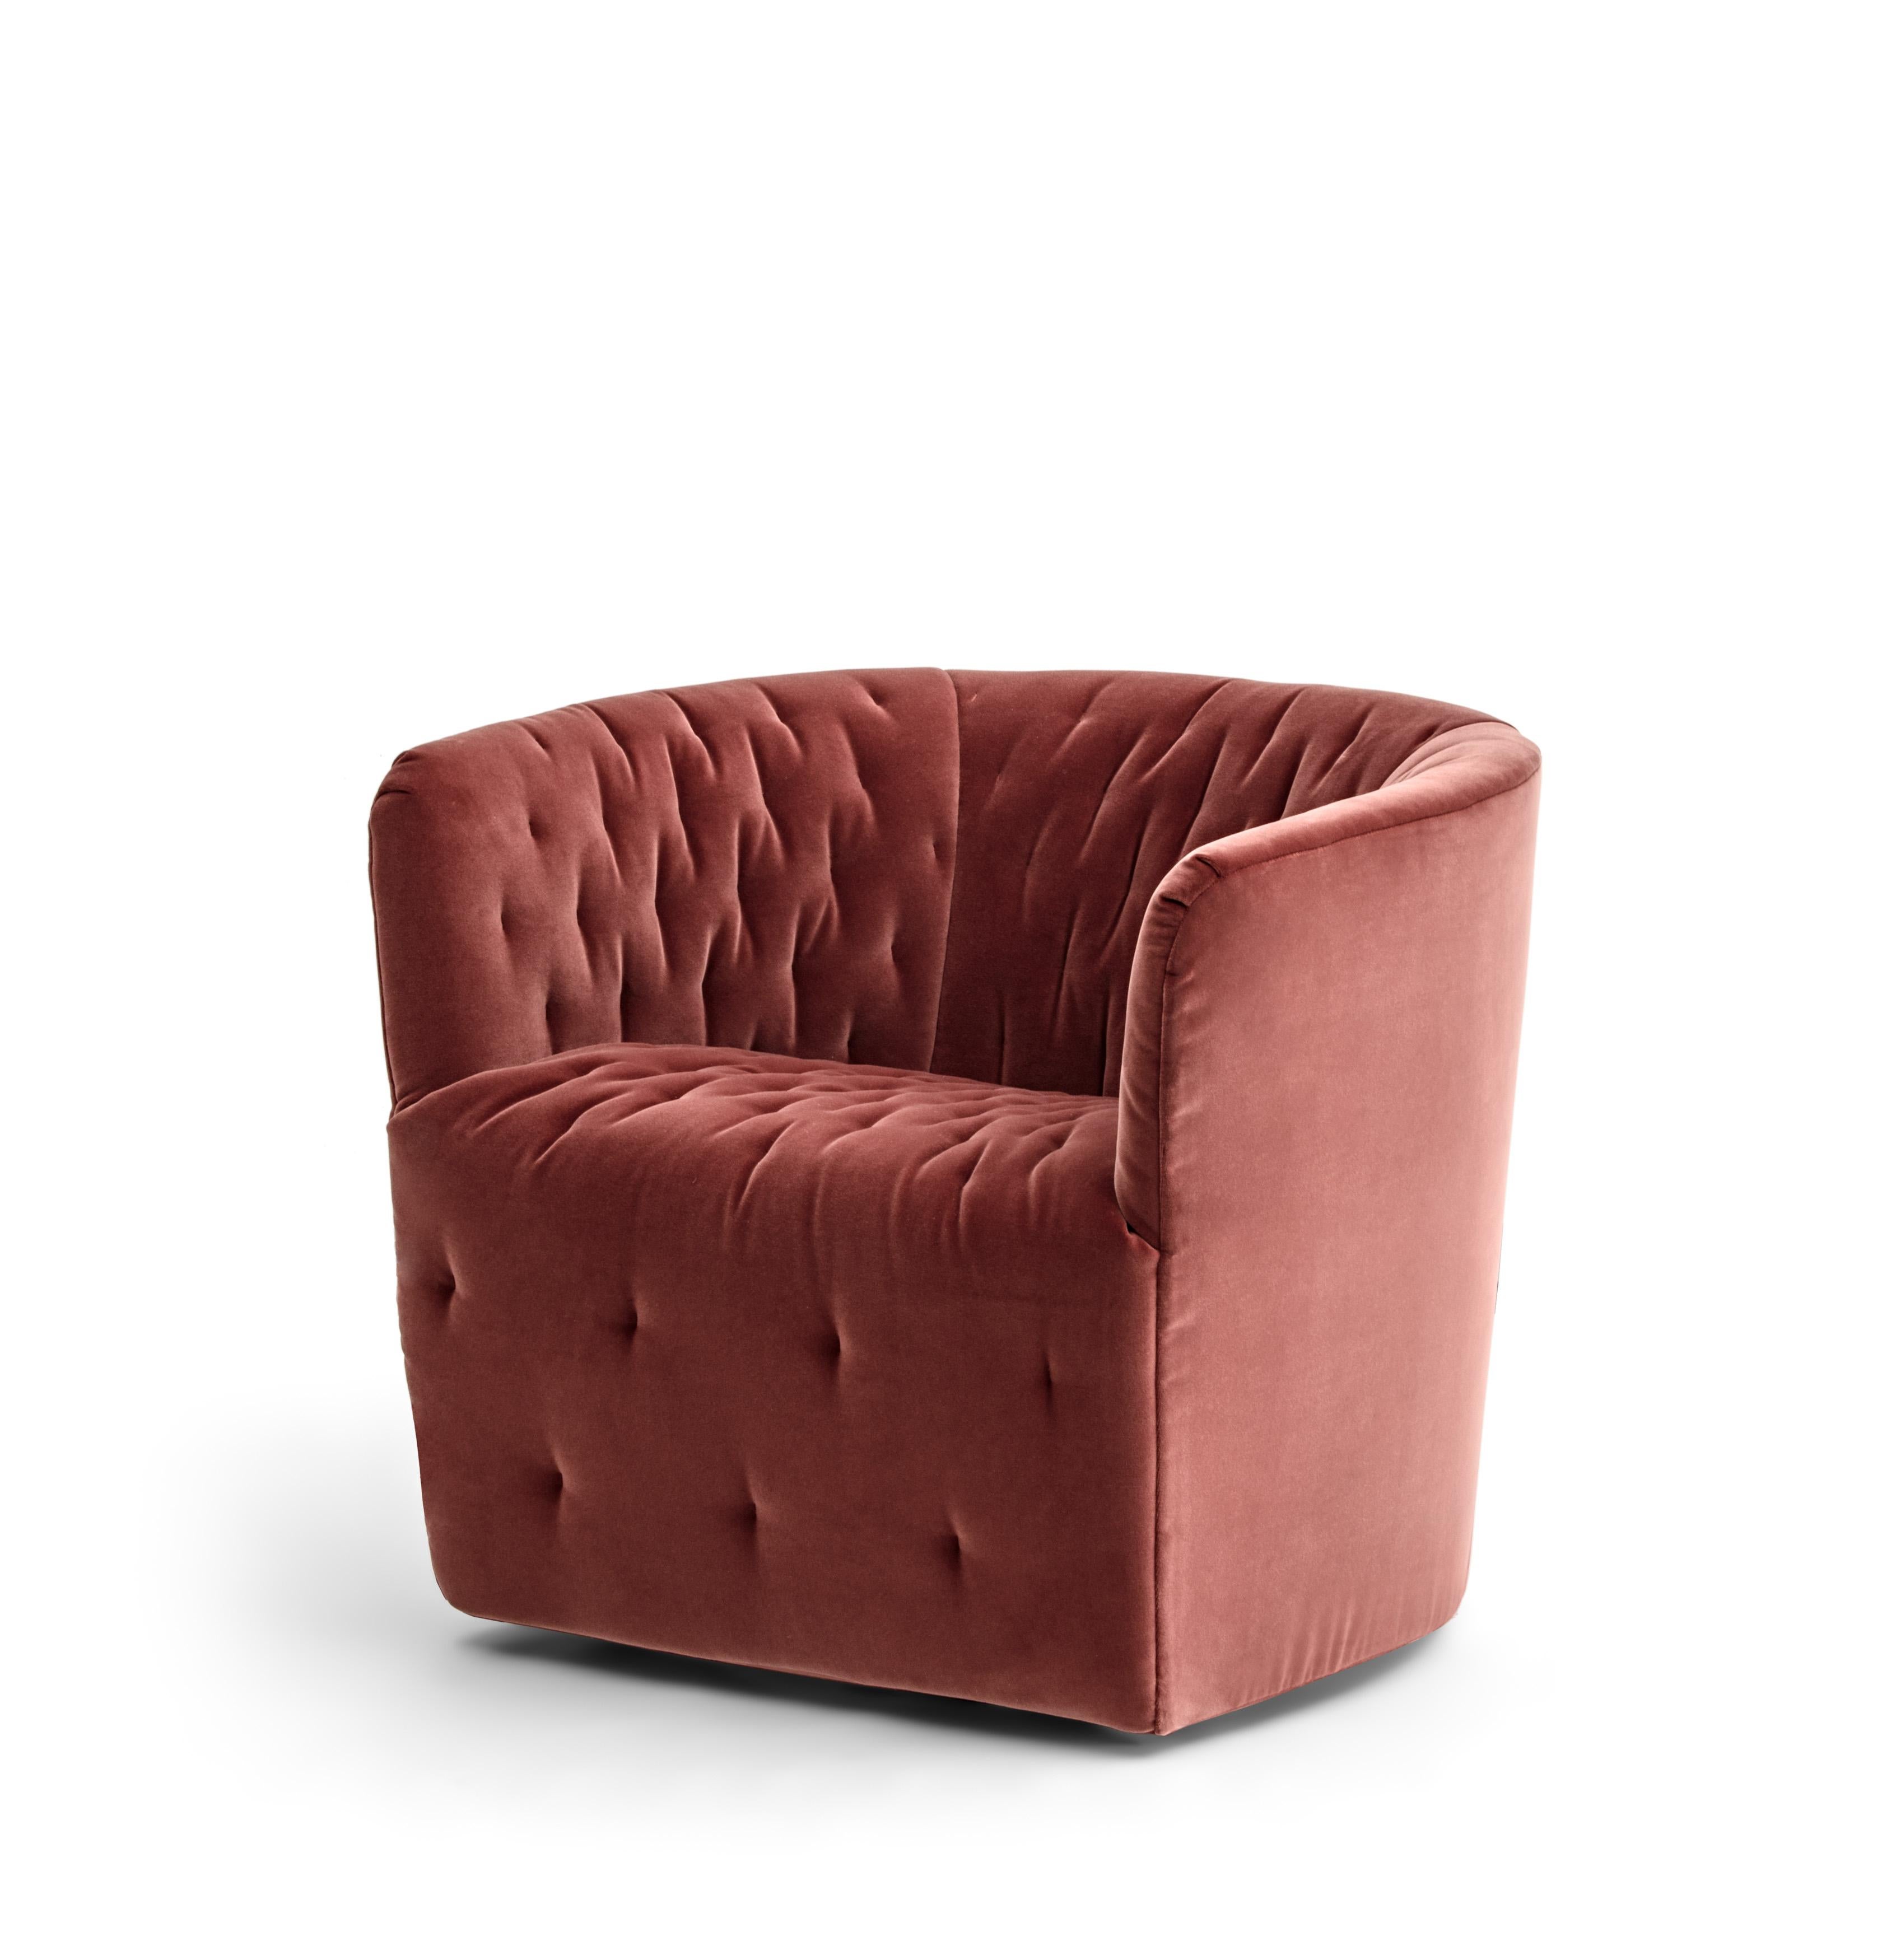 Delightfully pretty, the Amélie armchair conjures up visions of French haute couture. The special quilting highlighting the inner curves is done by hand according to a non-random pattern. Compact yet with a strong appeal, Amélie would be an